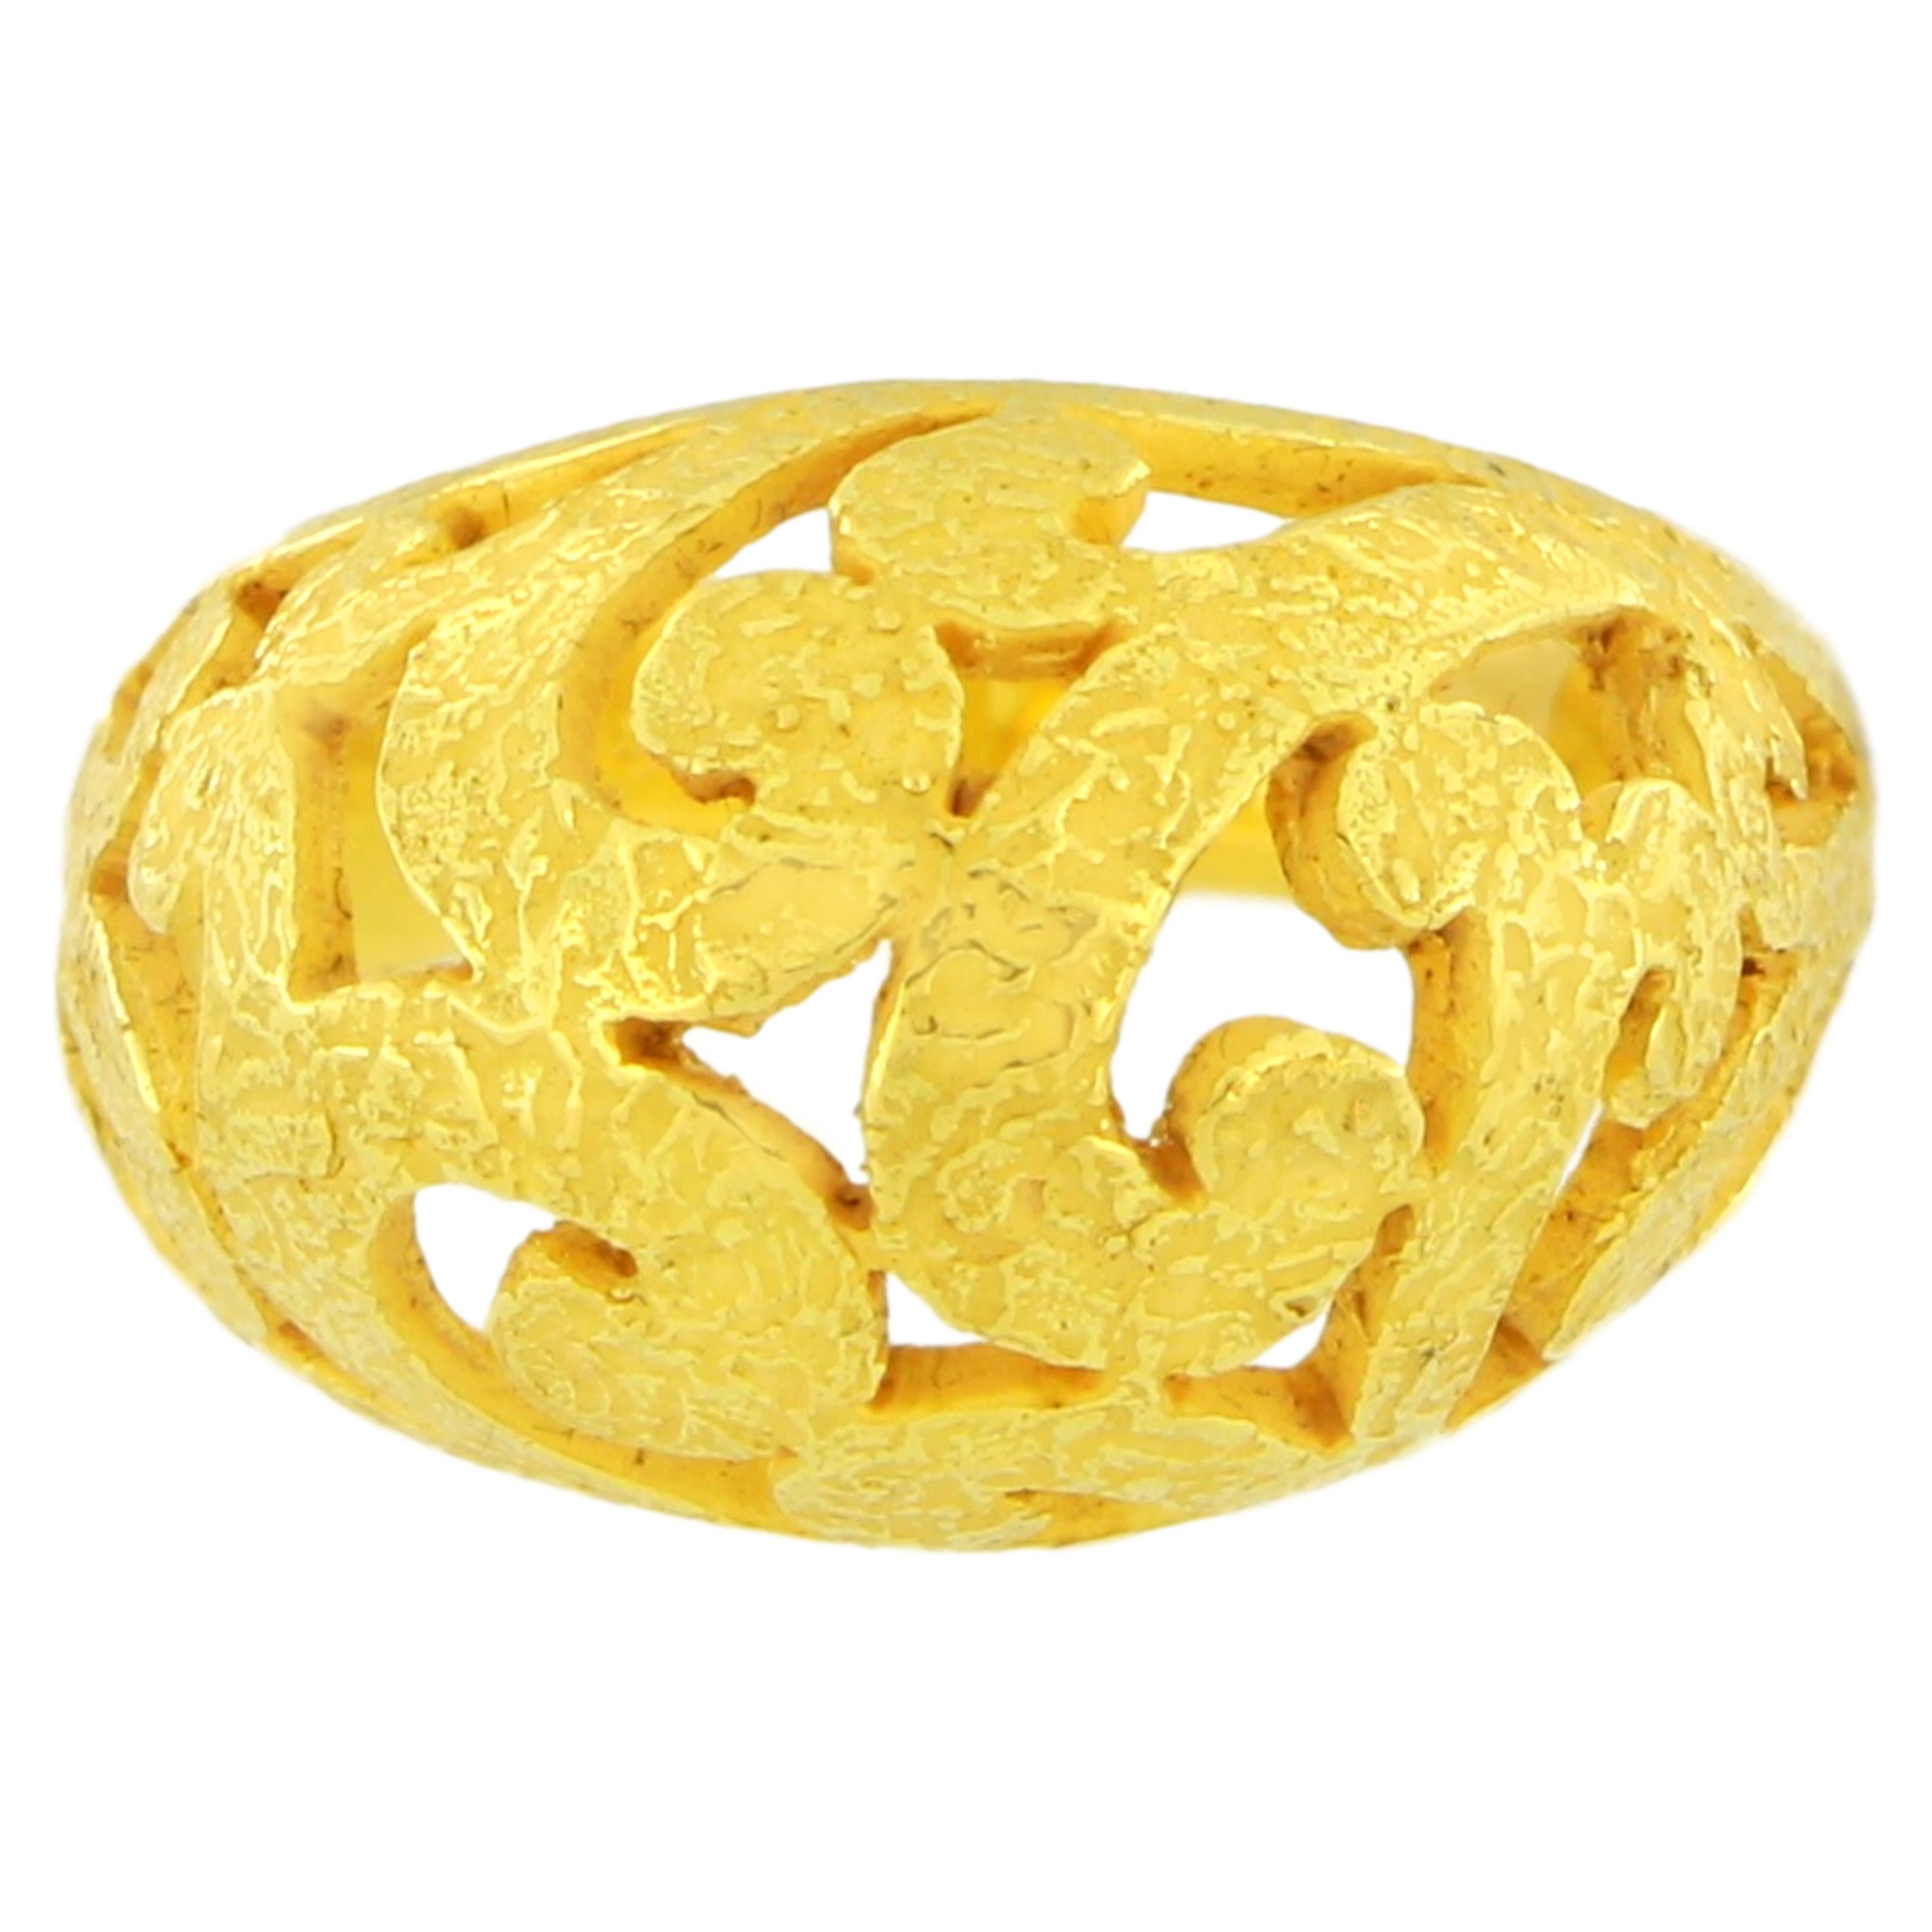 Gorgeous Art Deco Curlicue Style Fashion Ring in Satin Yellow Gold, hand-crafted with lost-wax casting technique.

Lost-wax casting, one of the oldest techniques for creating jewelry, forms the basis of Sacchi's jewelry production. Modelling wax in